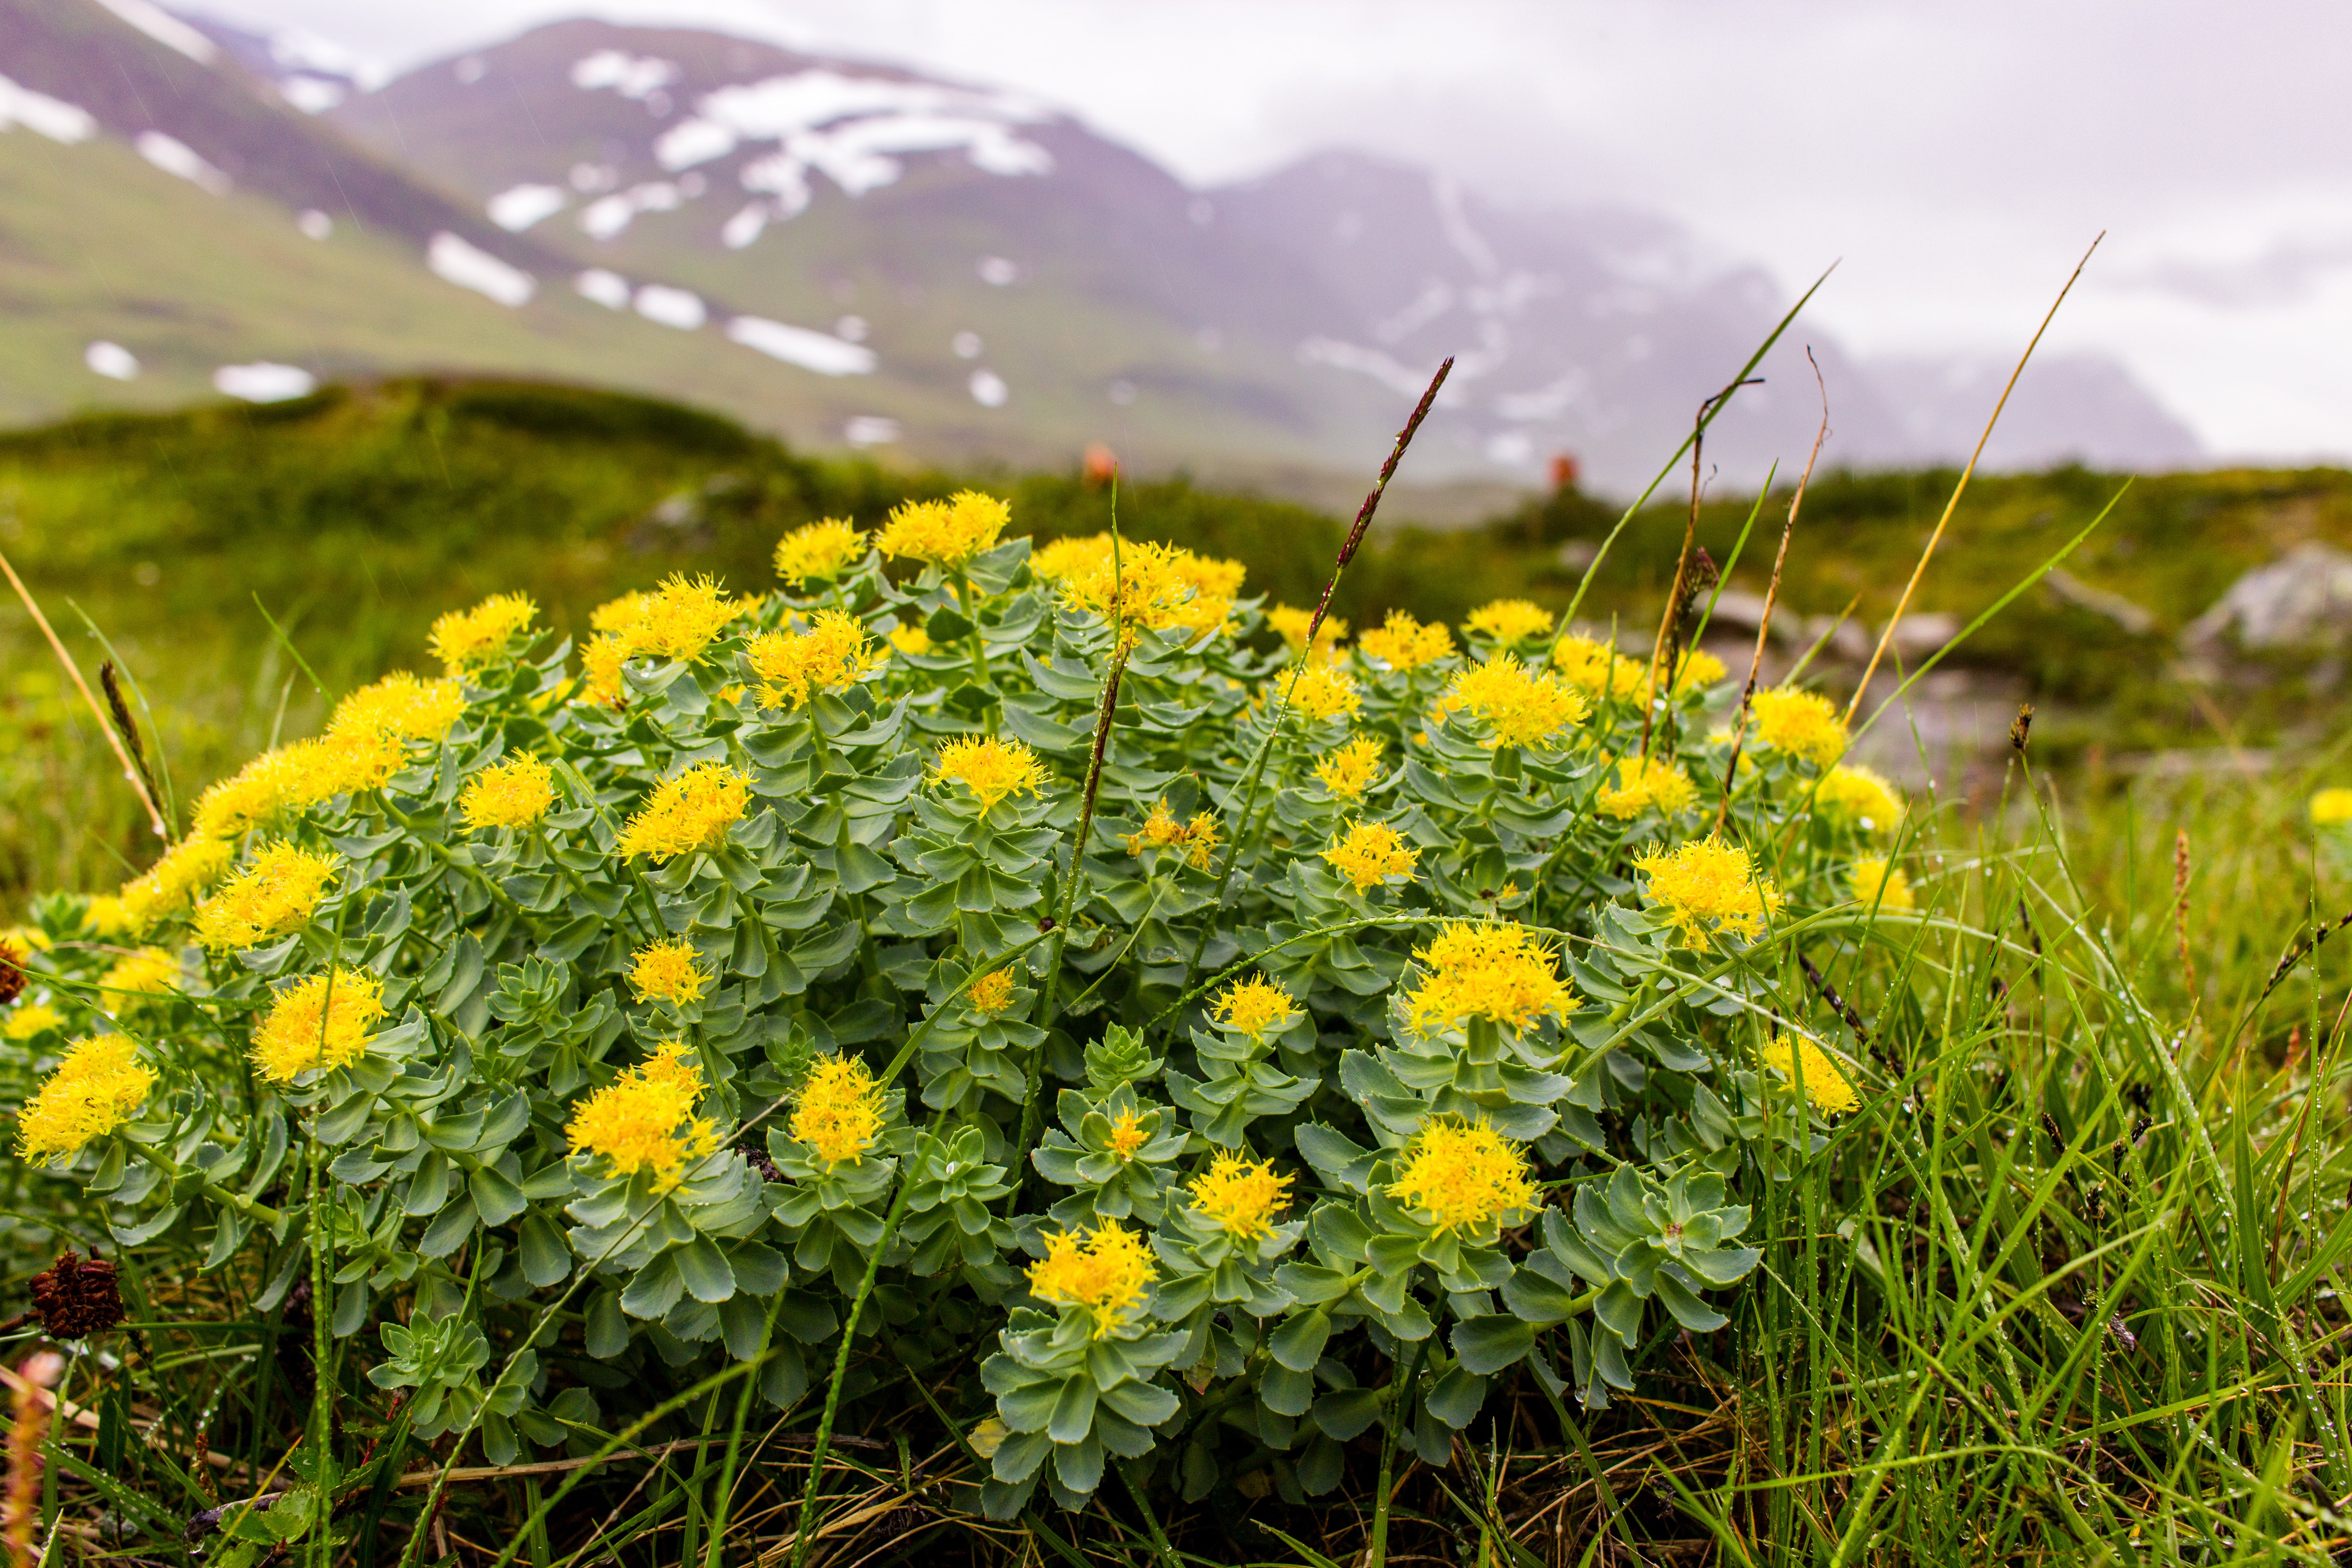 Rhodiola plant in the wild